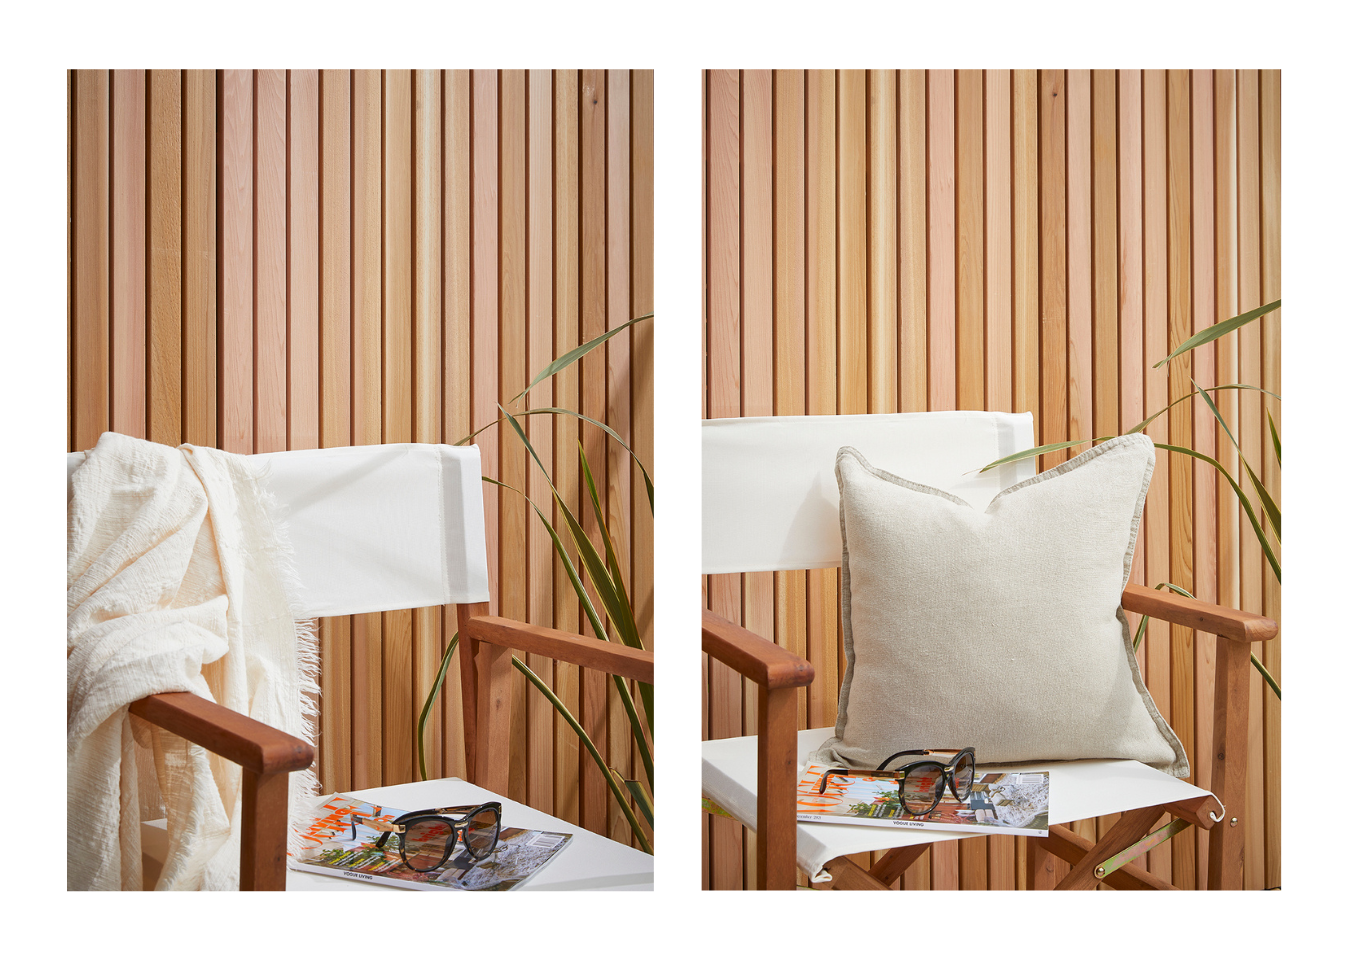 Left: Cedar fence behind a white chair with a blanket, magazine and sunglasses placed on top. Right: the same chair with a beige cushion.